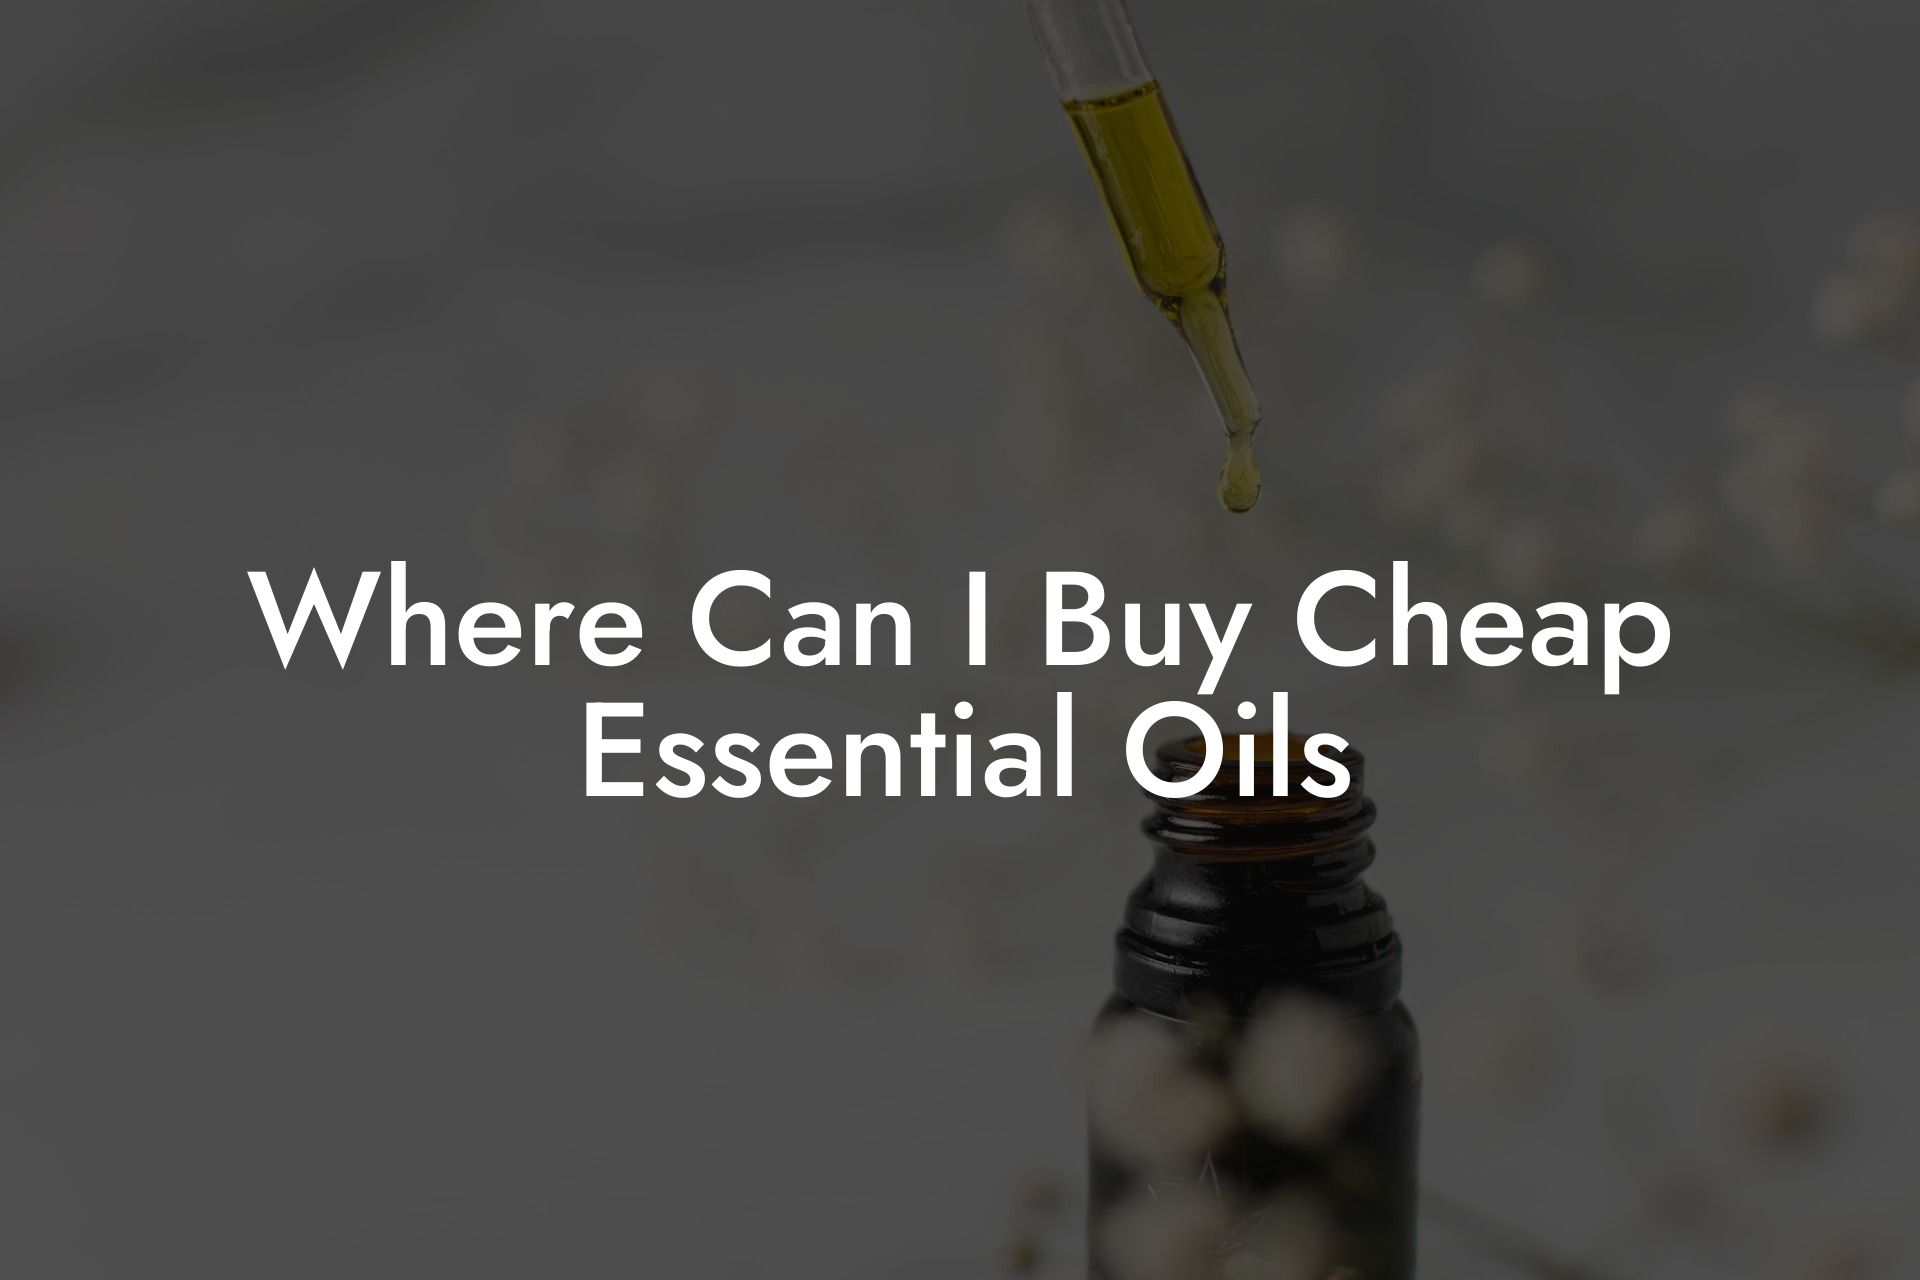 Where Can I Buy Cheap Essential Oils